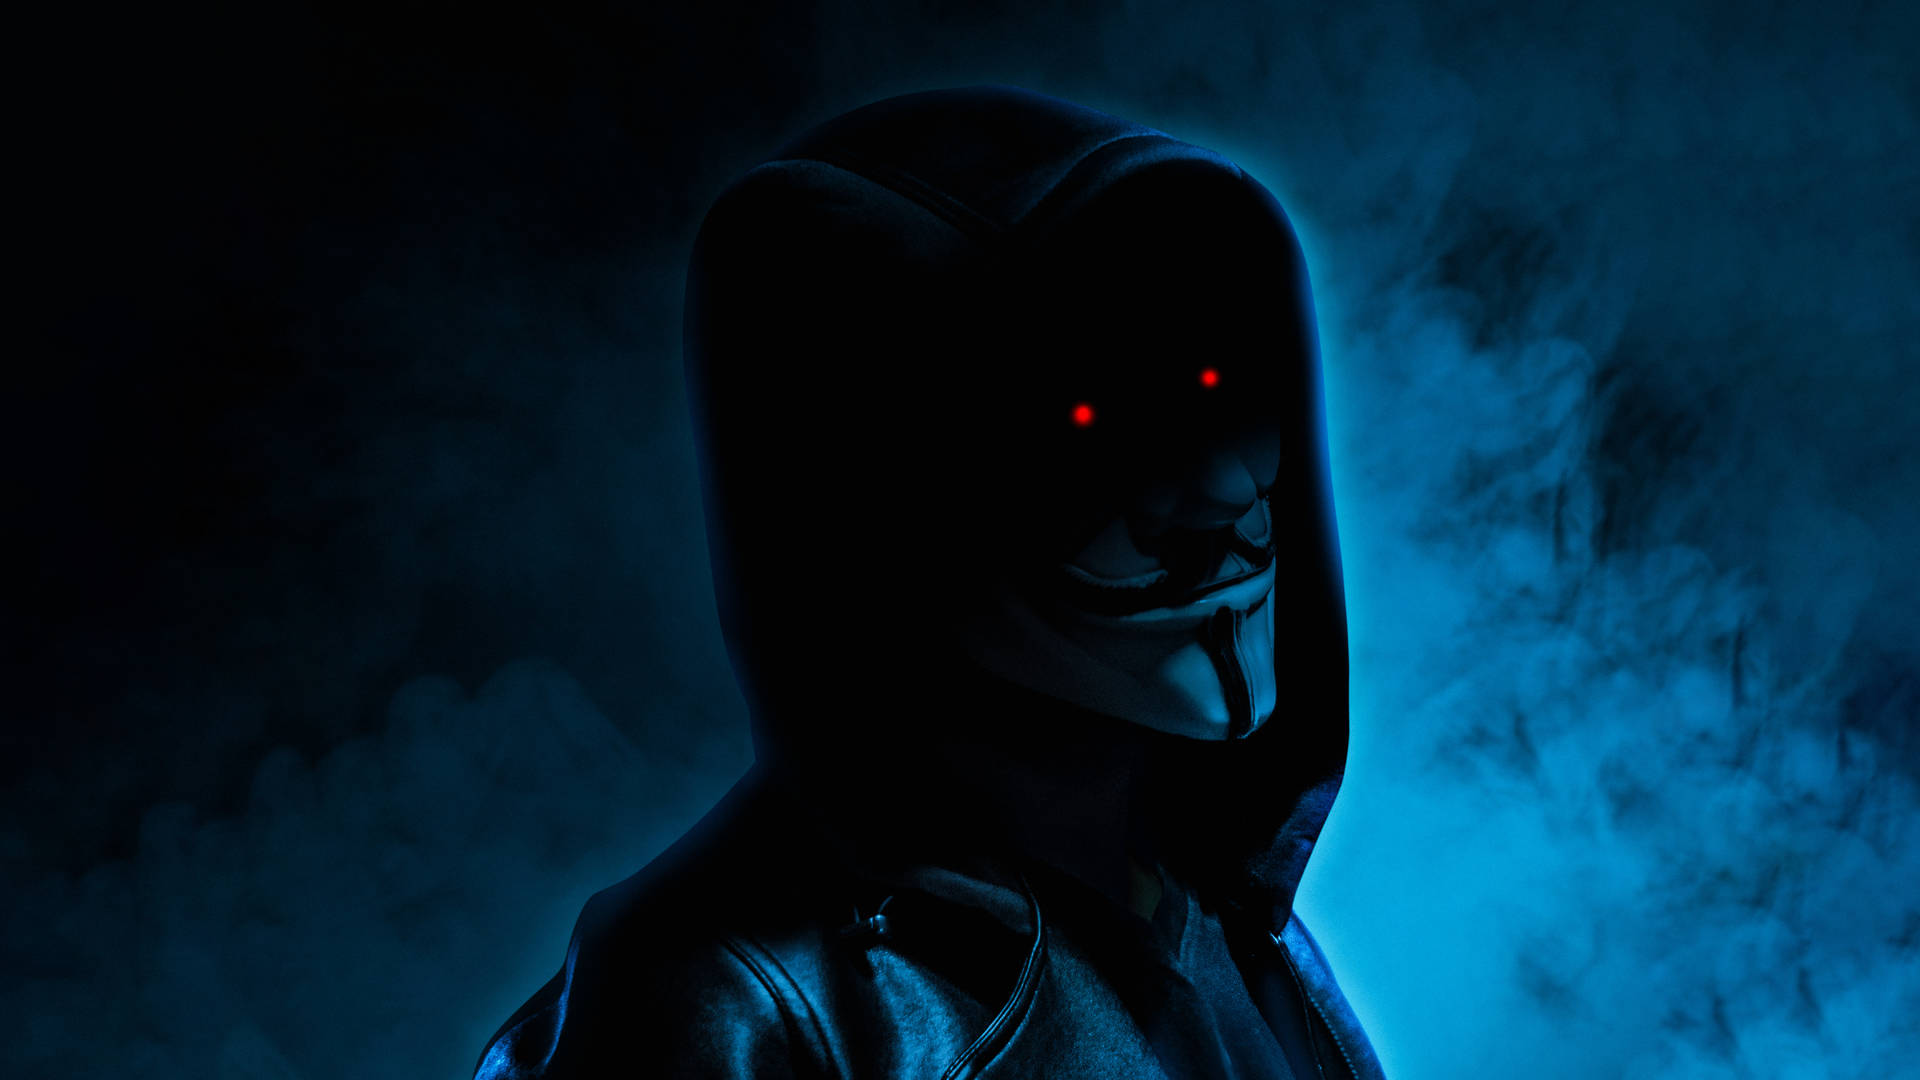 5khd Anonyme Hacker Rote Augen Wallpaper